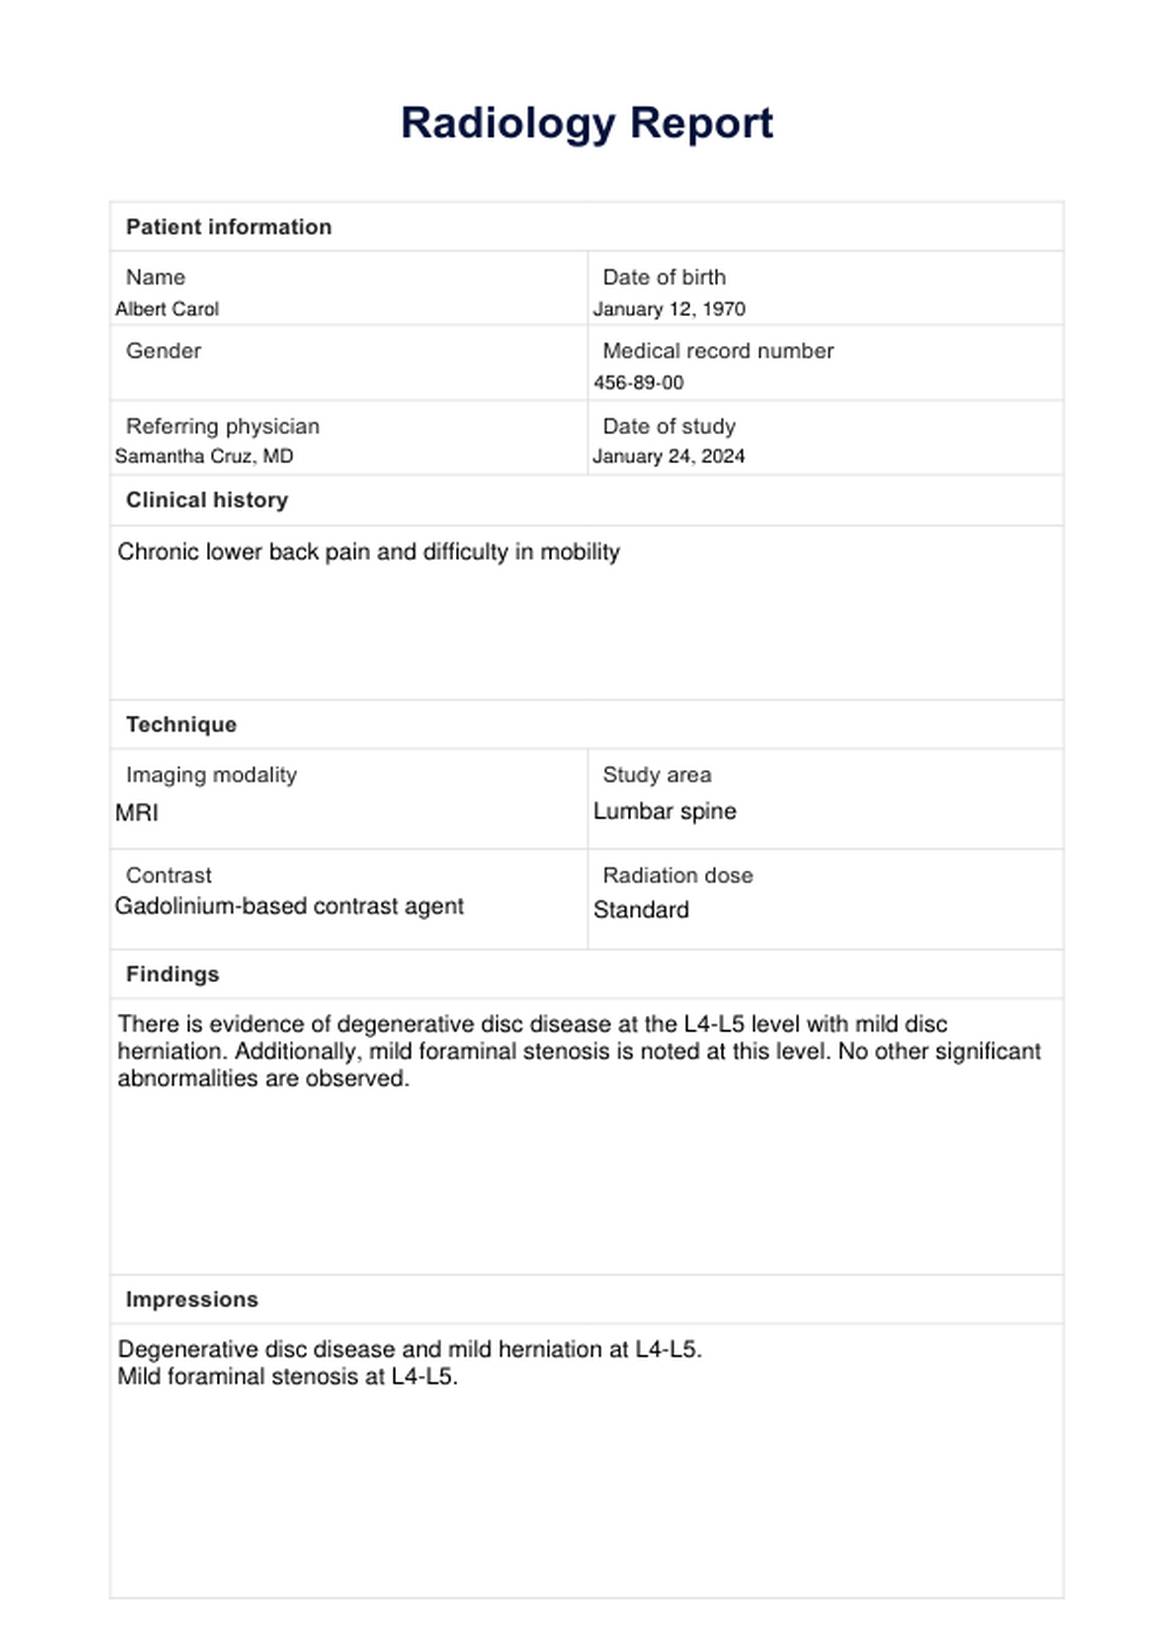 Radiology Report Template PDF Example